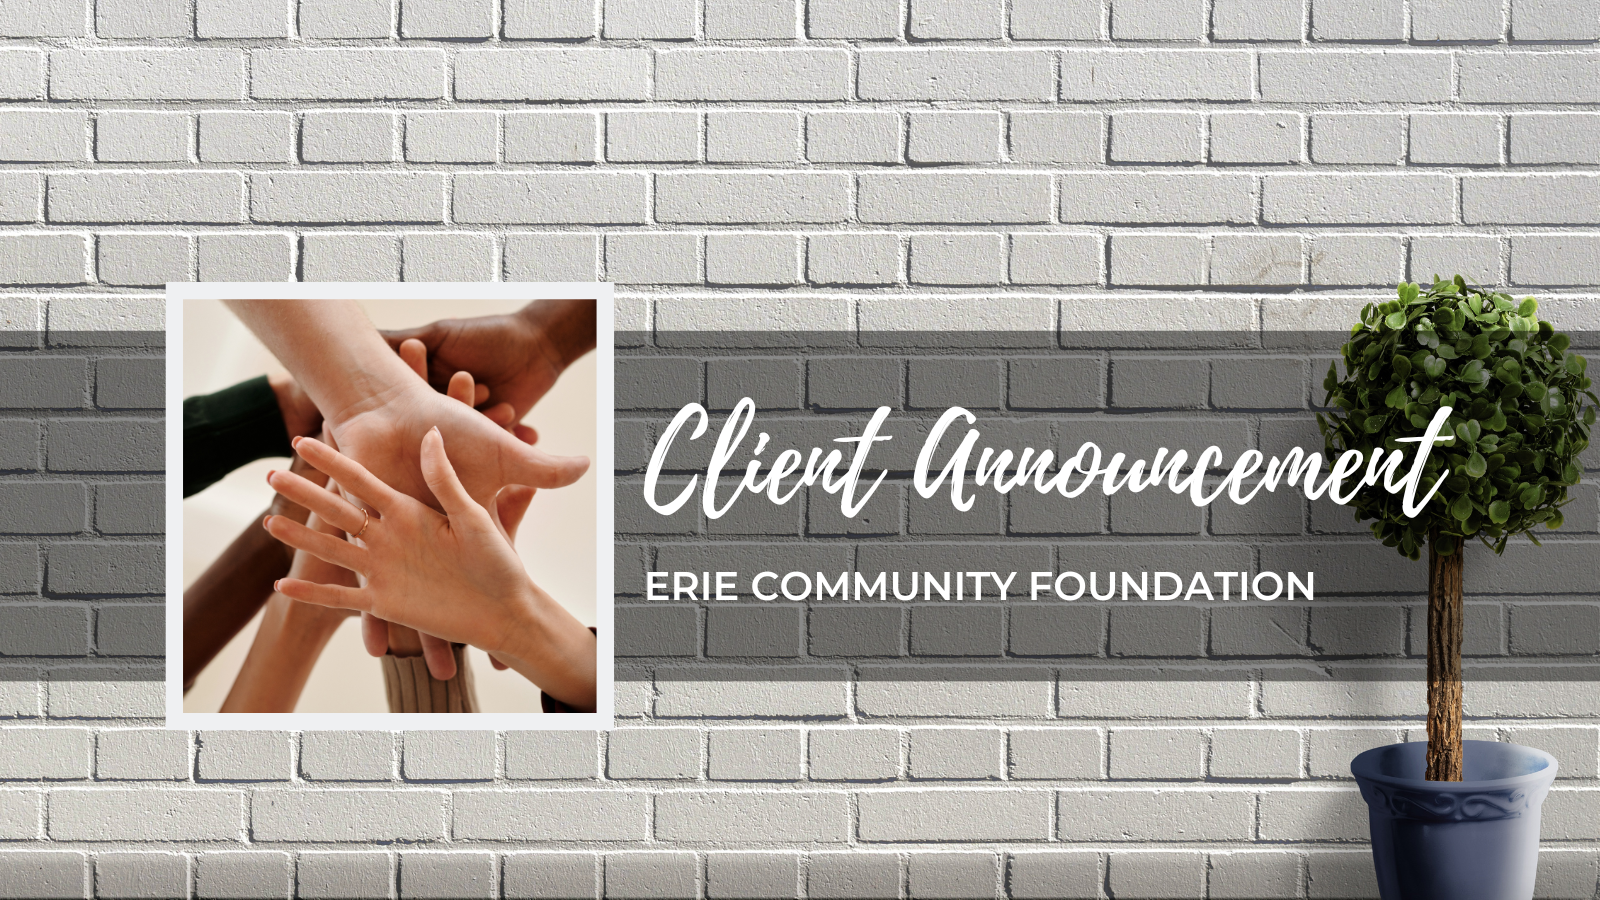 Welcome Erie Community Foundation